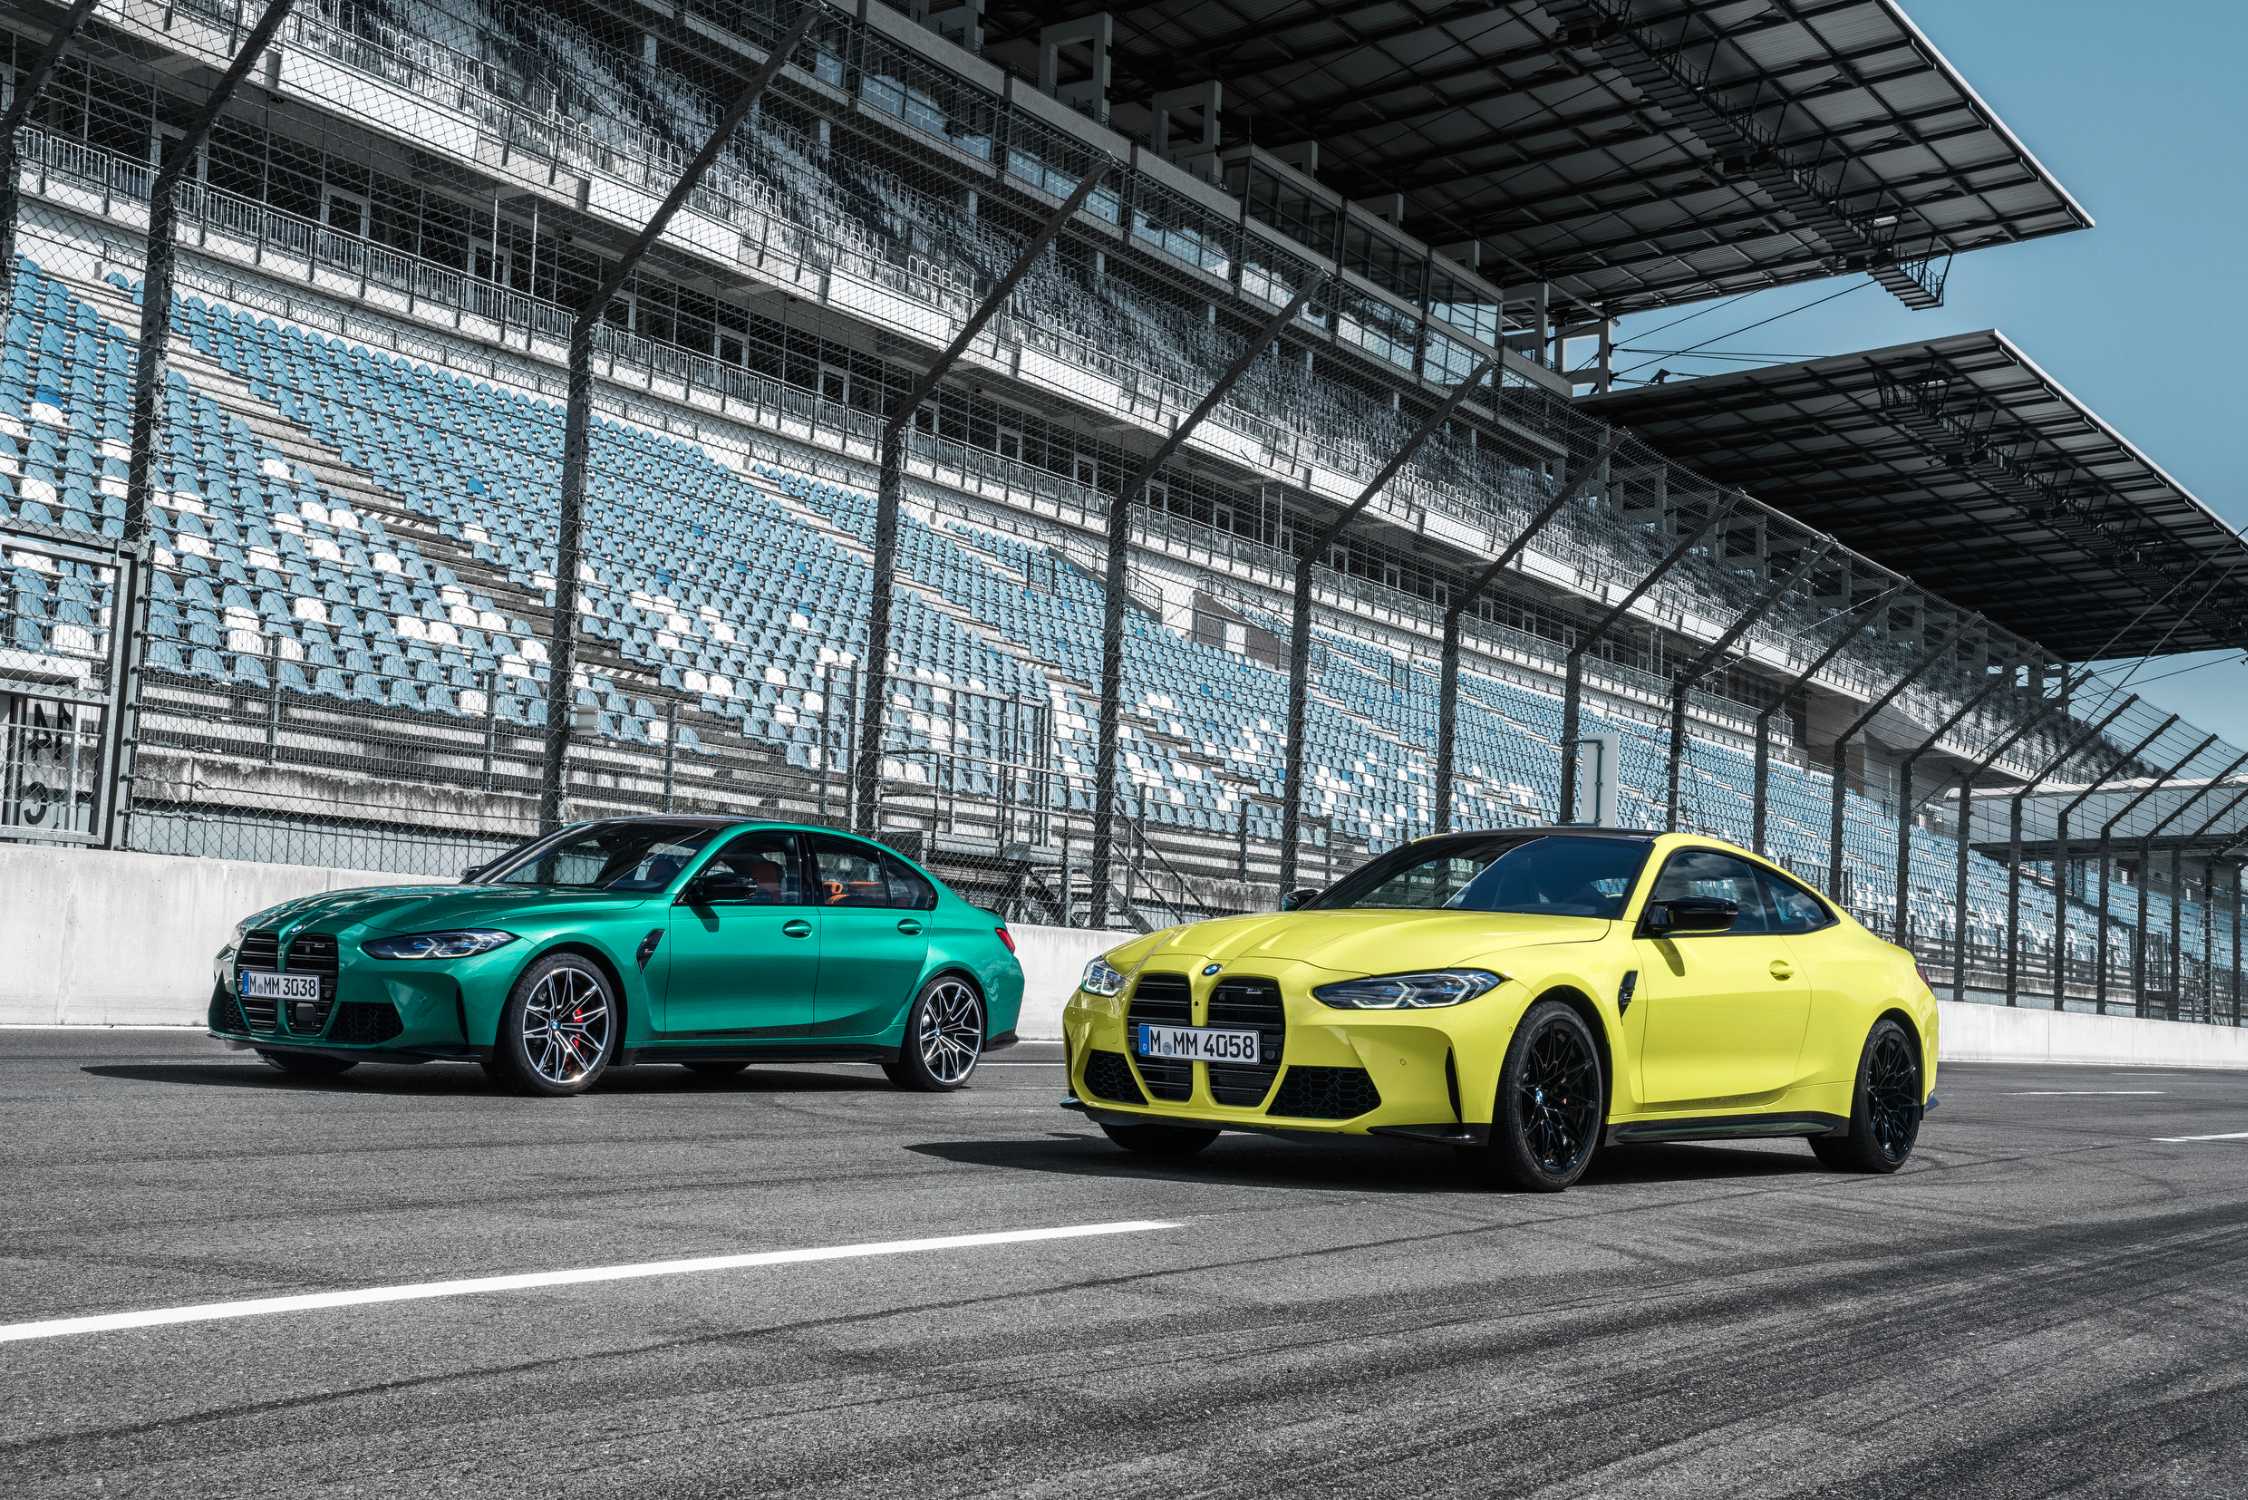 The New 2021 BMW M3 Sedan and M4 Coupe